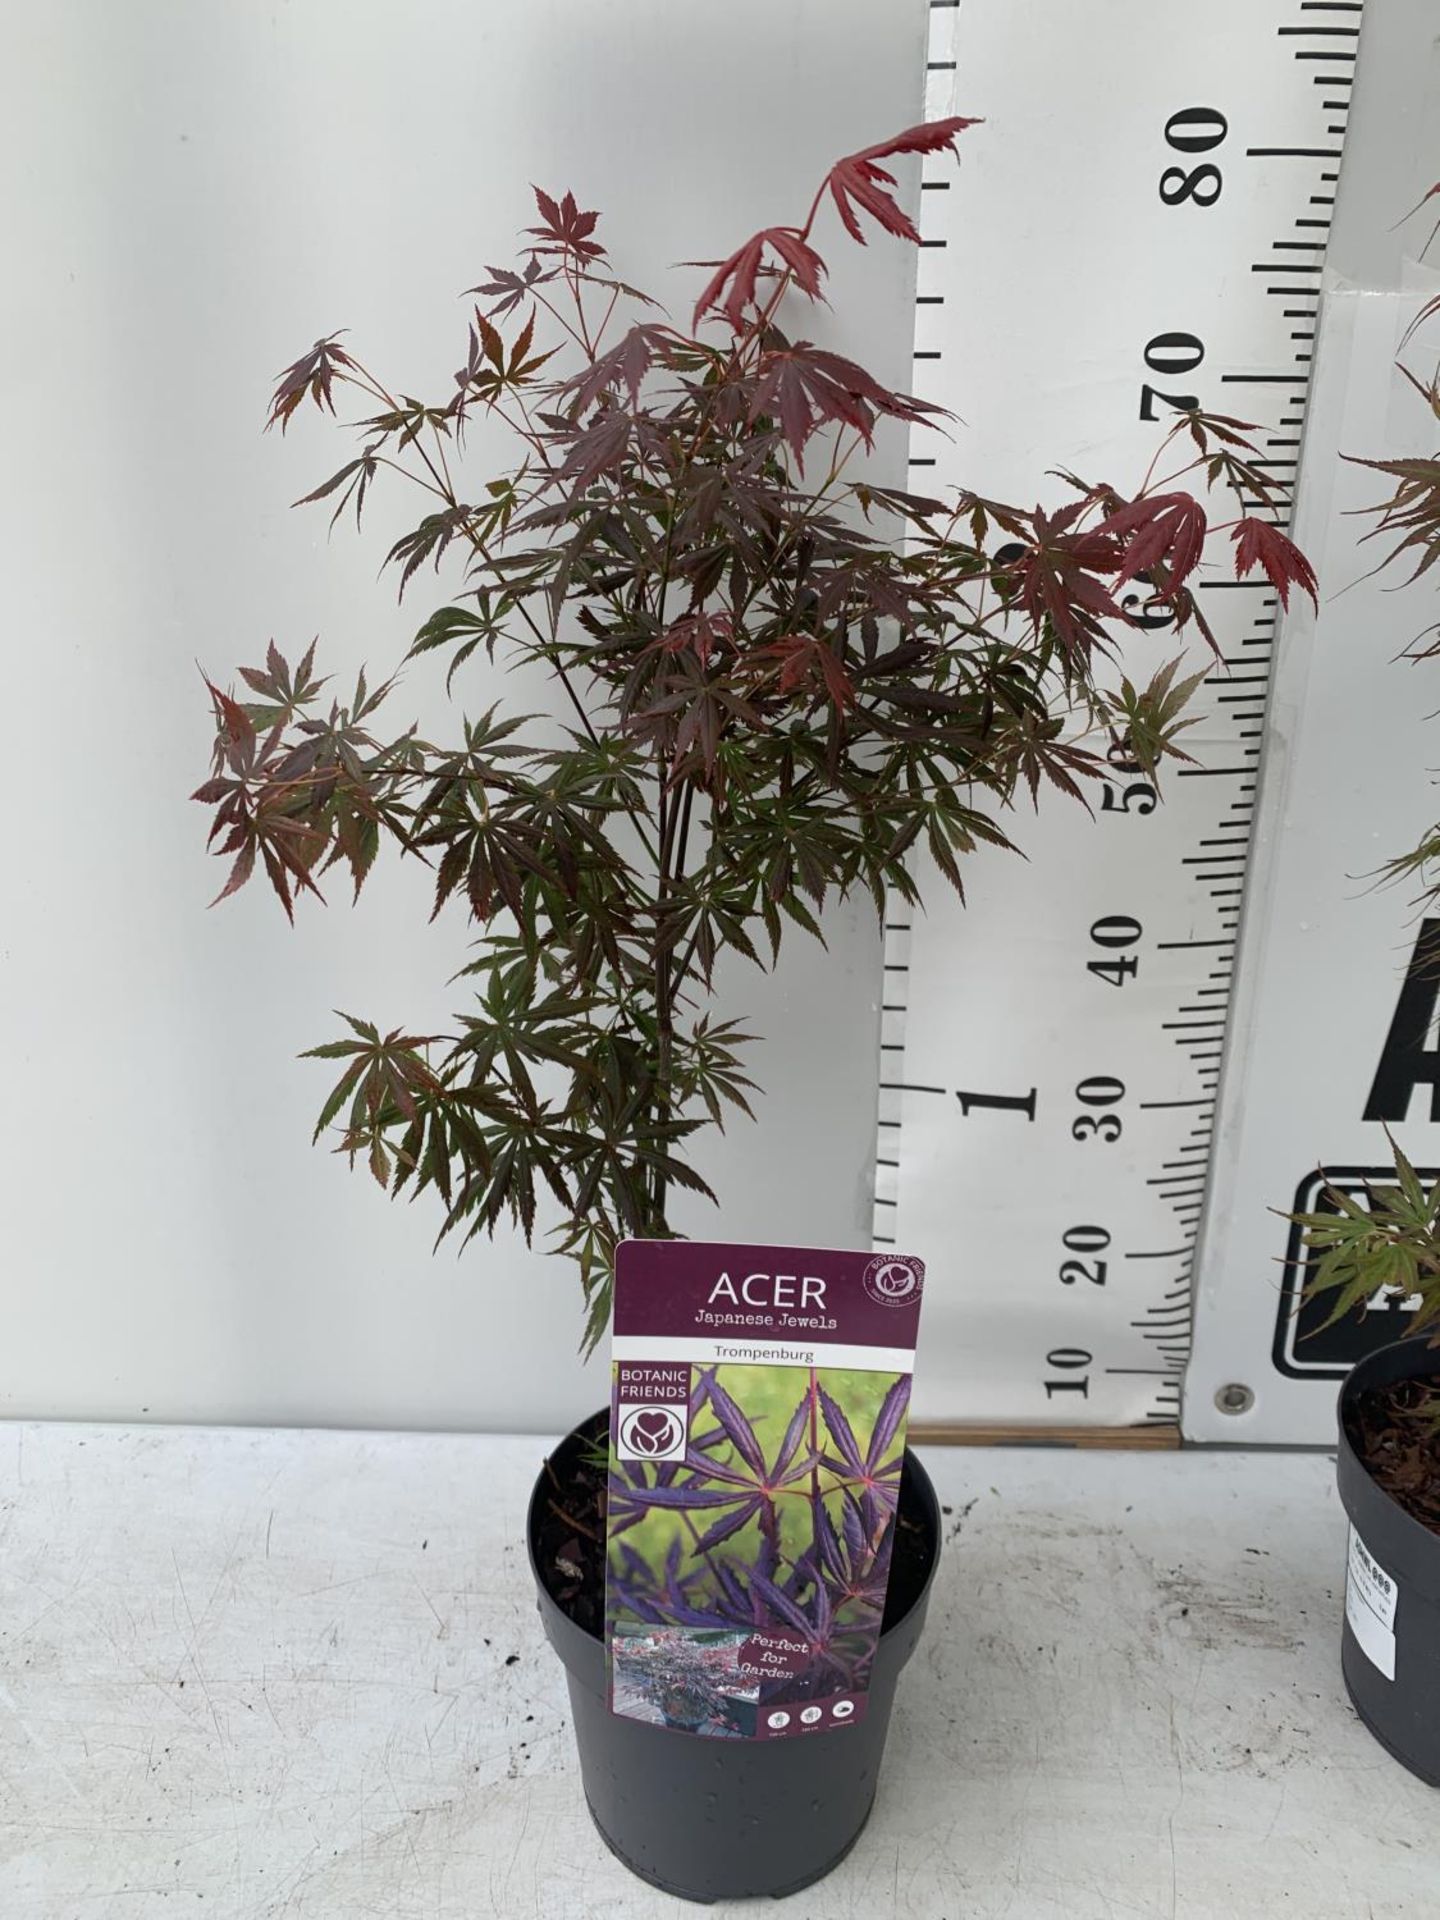 TWO ACER PALMATUM JAPANESE JEWELS IN 3 LTR POTS TO INCLUDE A TROMPENBURG AND A SHAINA 70 -80CM - Bild 2 aus 8